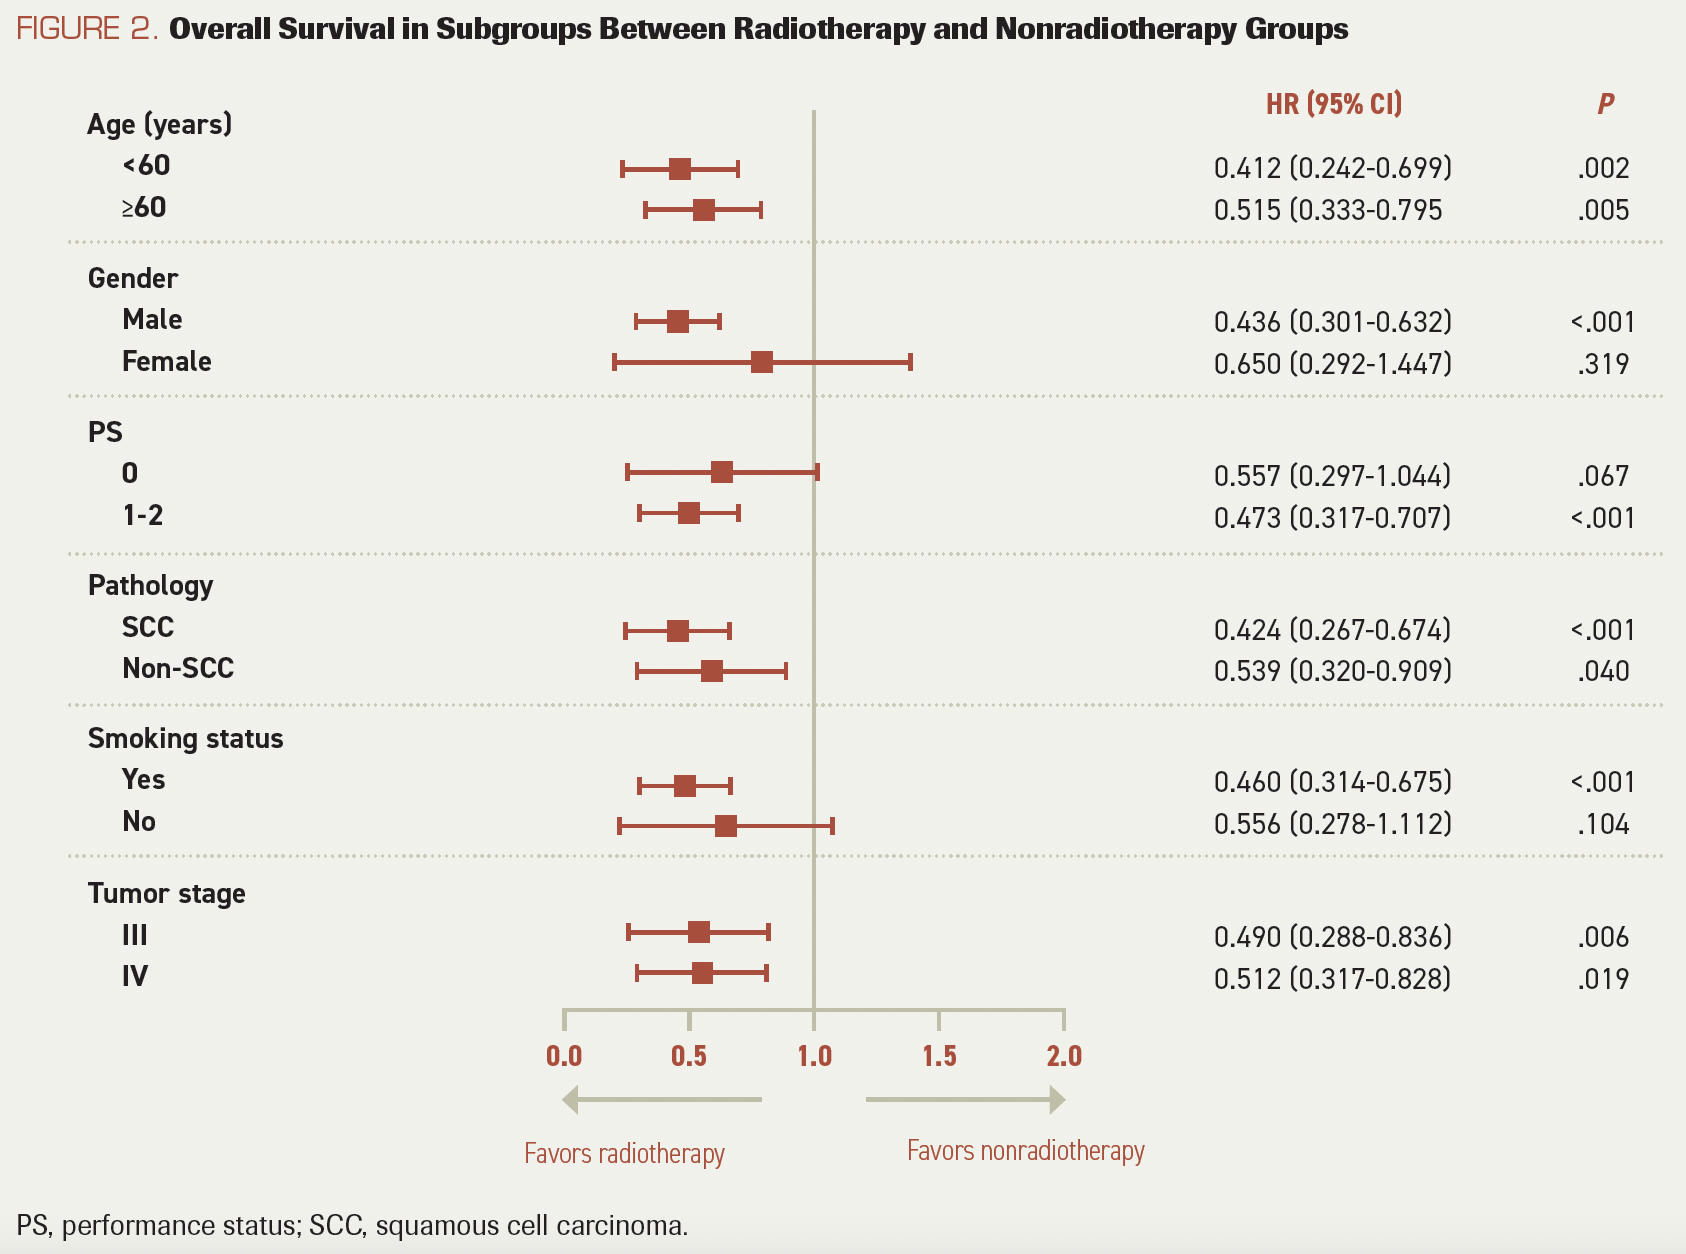 FIGURE 2. Overall Survival in Subgroups Between Radiotherapy and Nonradiotherapy Groups